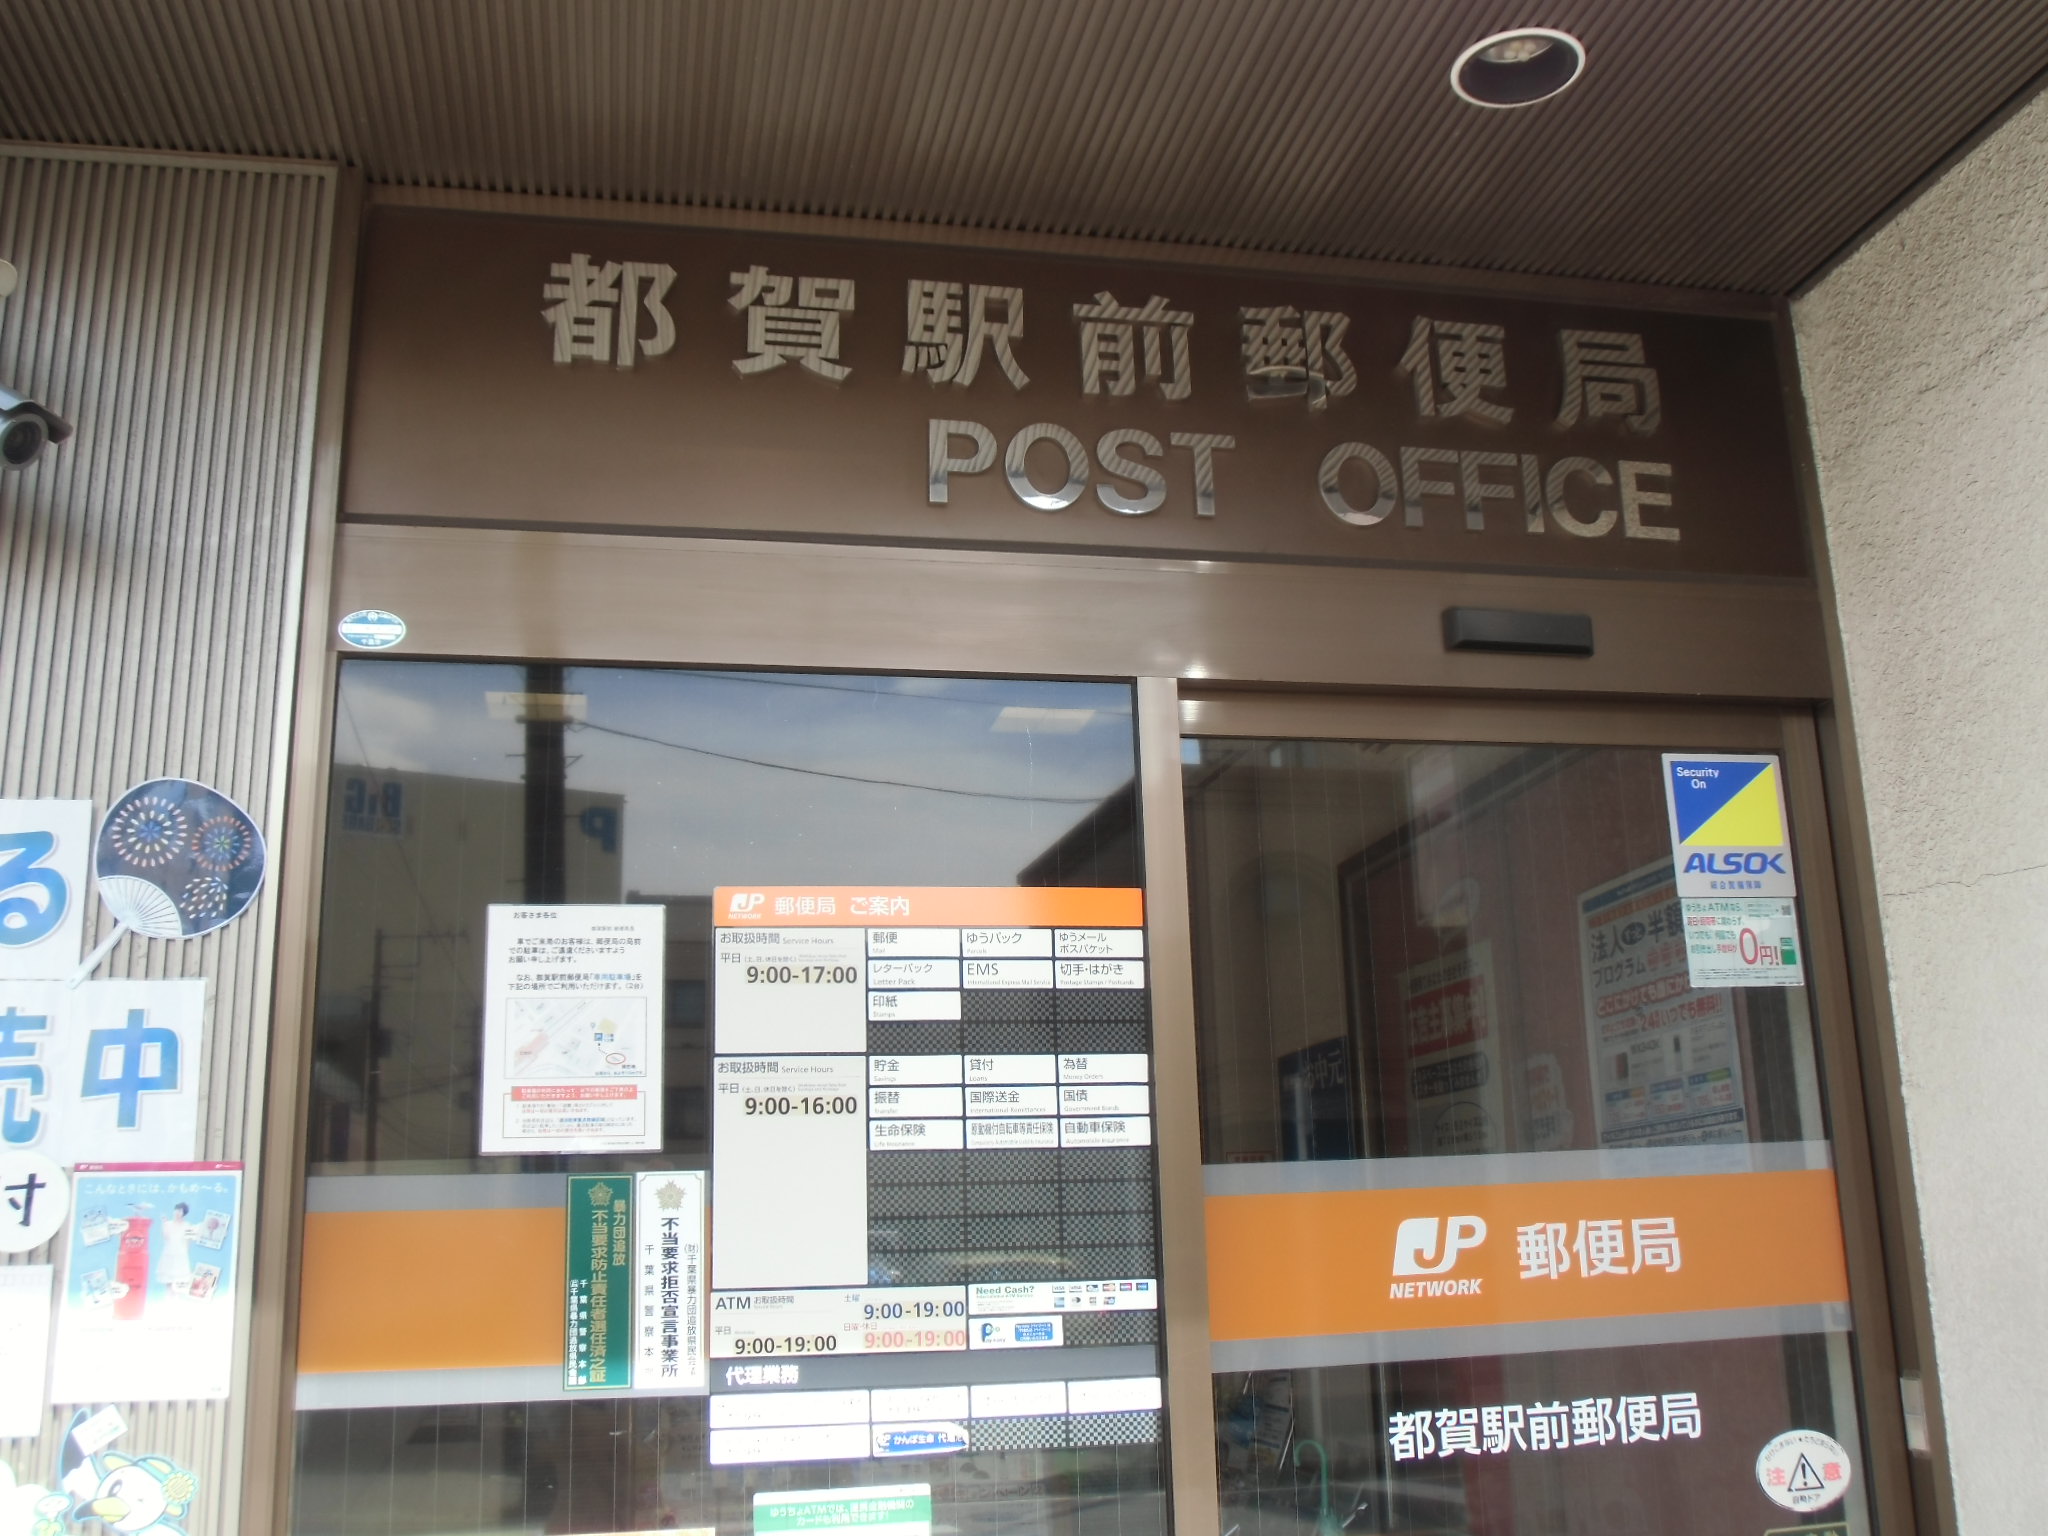 post office. Toga until Station post office (post office) 1034m